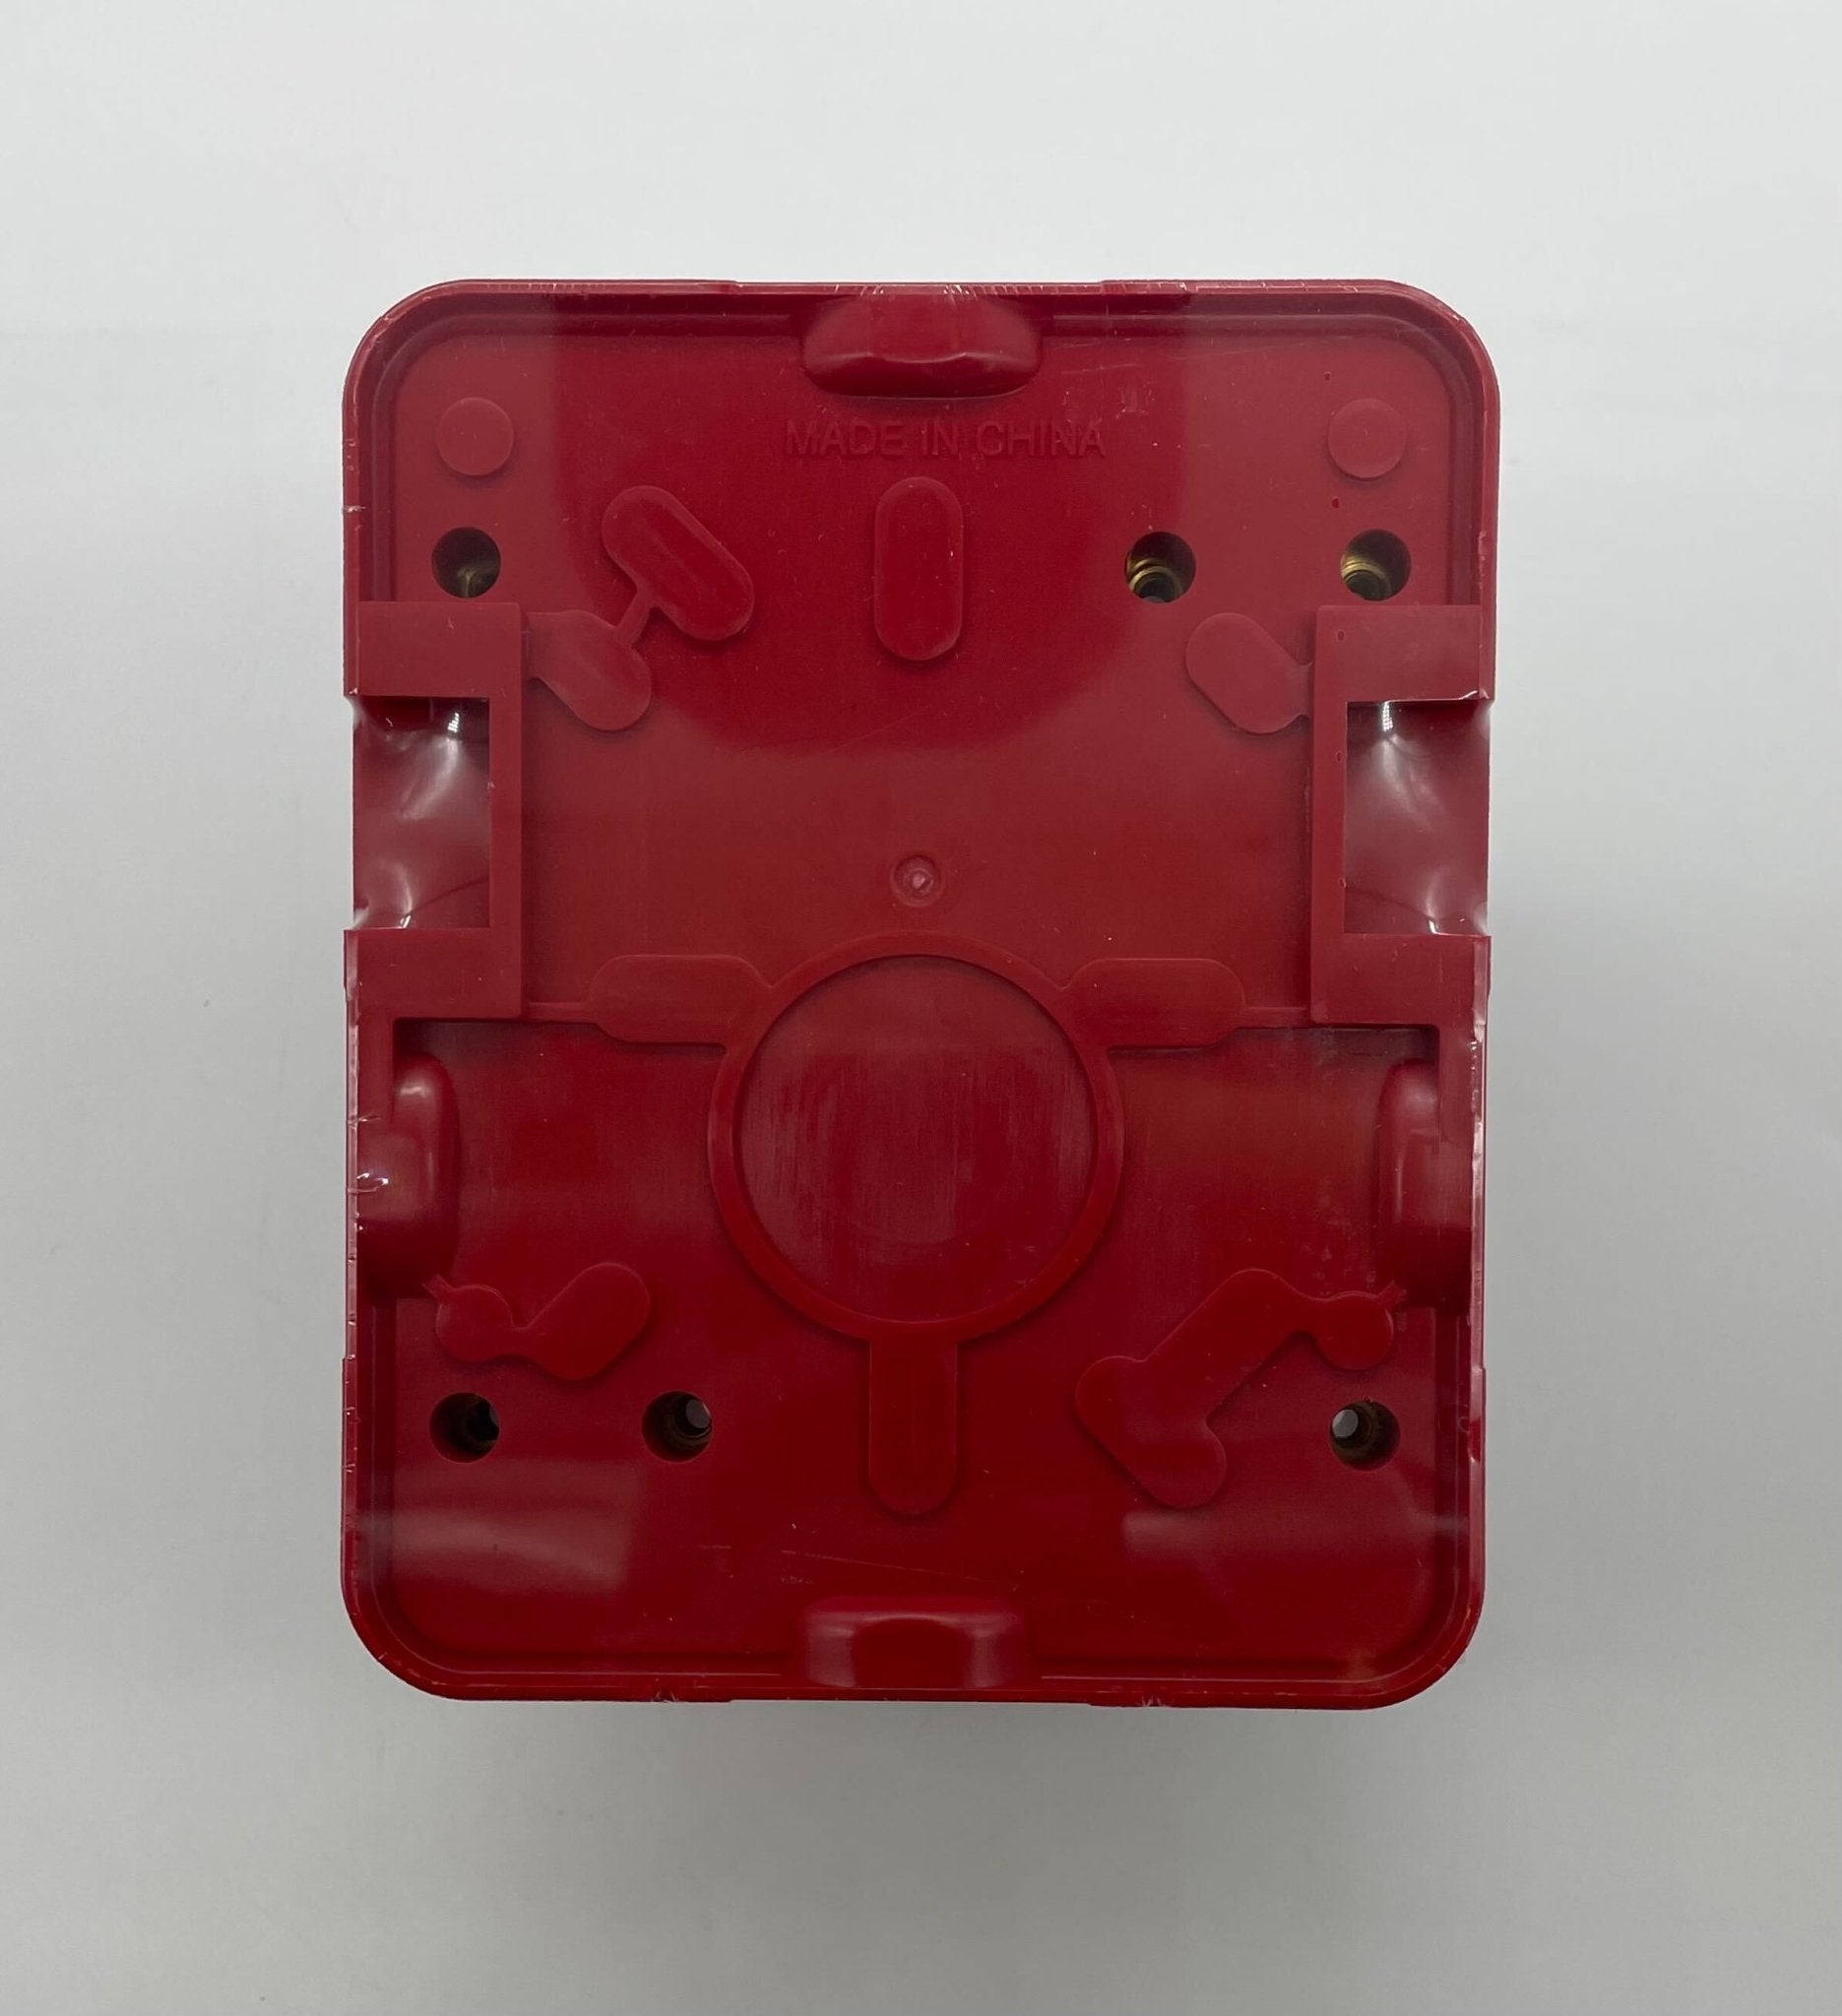 Potter CHS-24BR-WP - The Fire Alarm Supplier